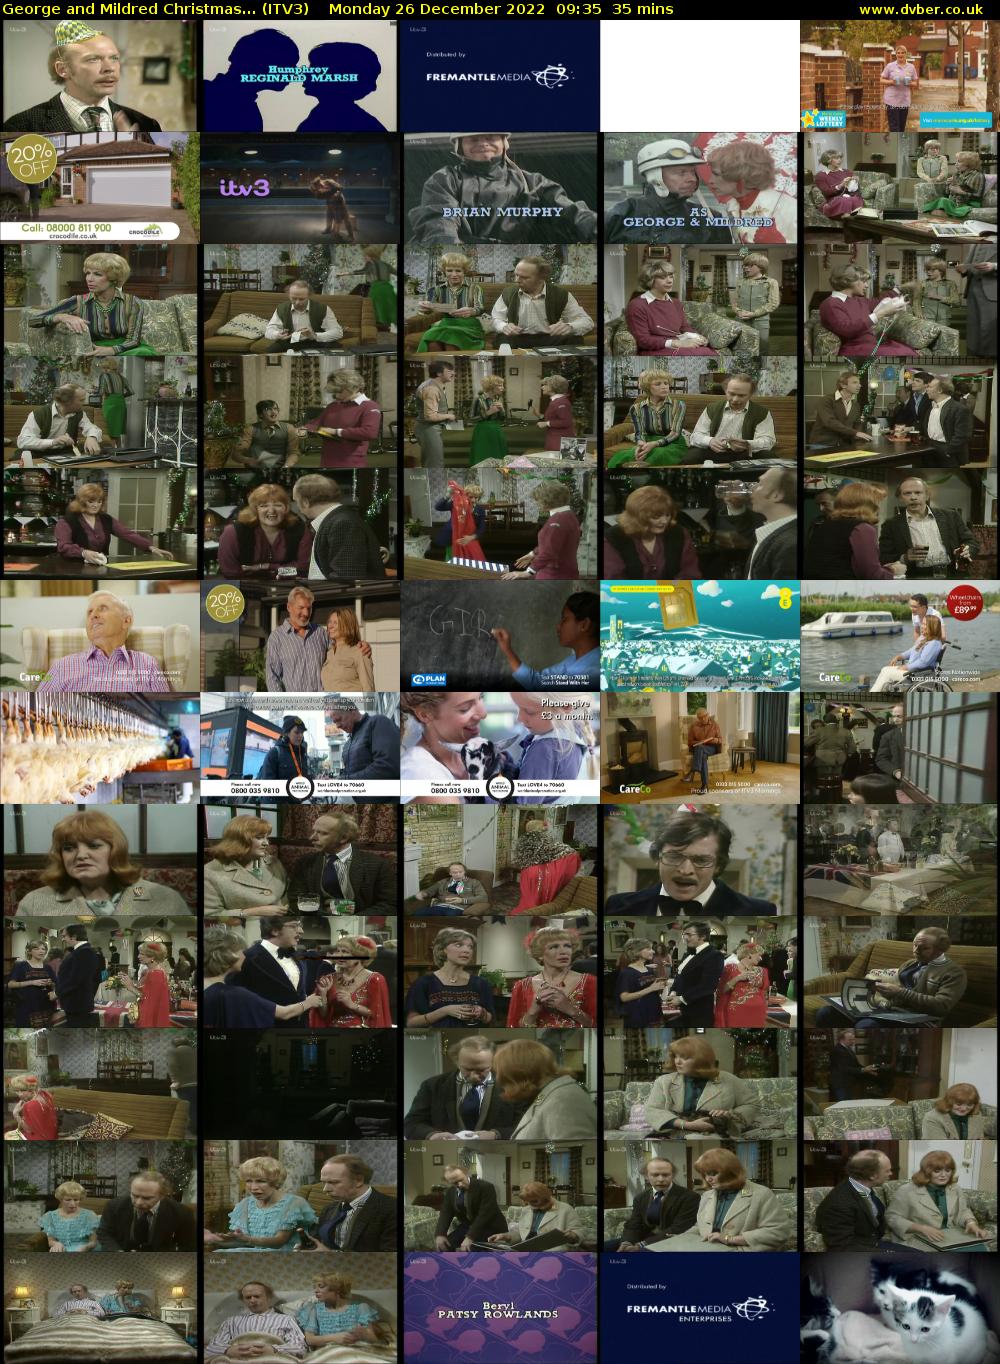 George and Mildred Christmas... (ITV3) Monday 26 December 2022 09:35 - 10:10